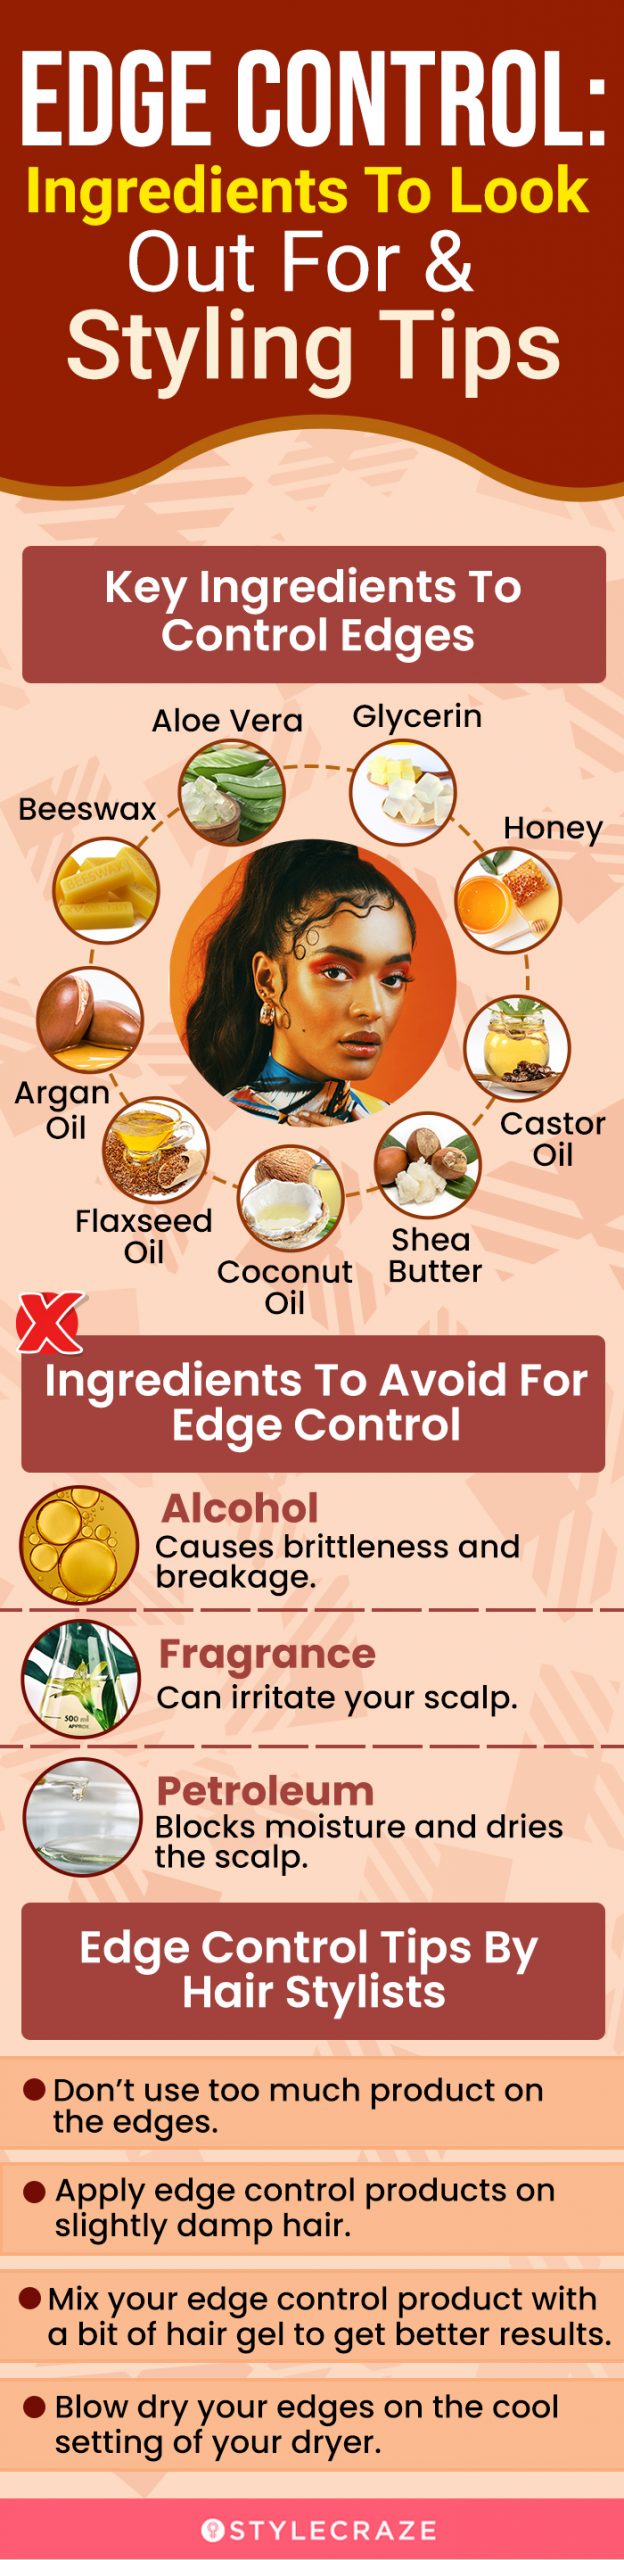 Edge Control: Ingredients To Look Out For [infographic]